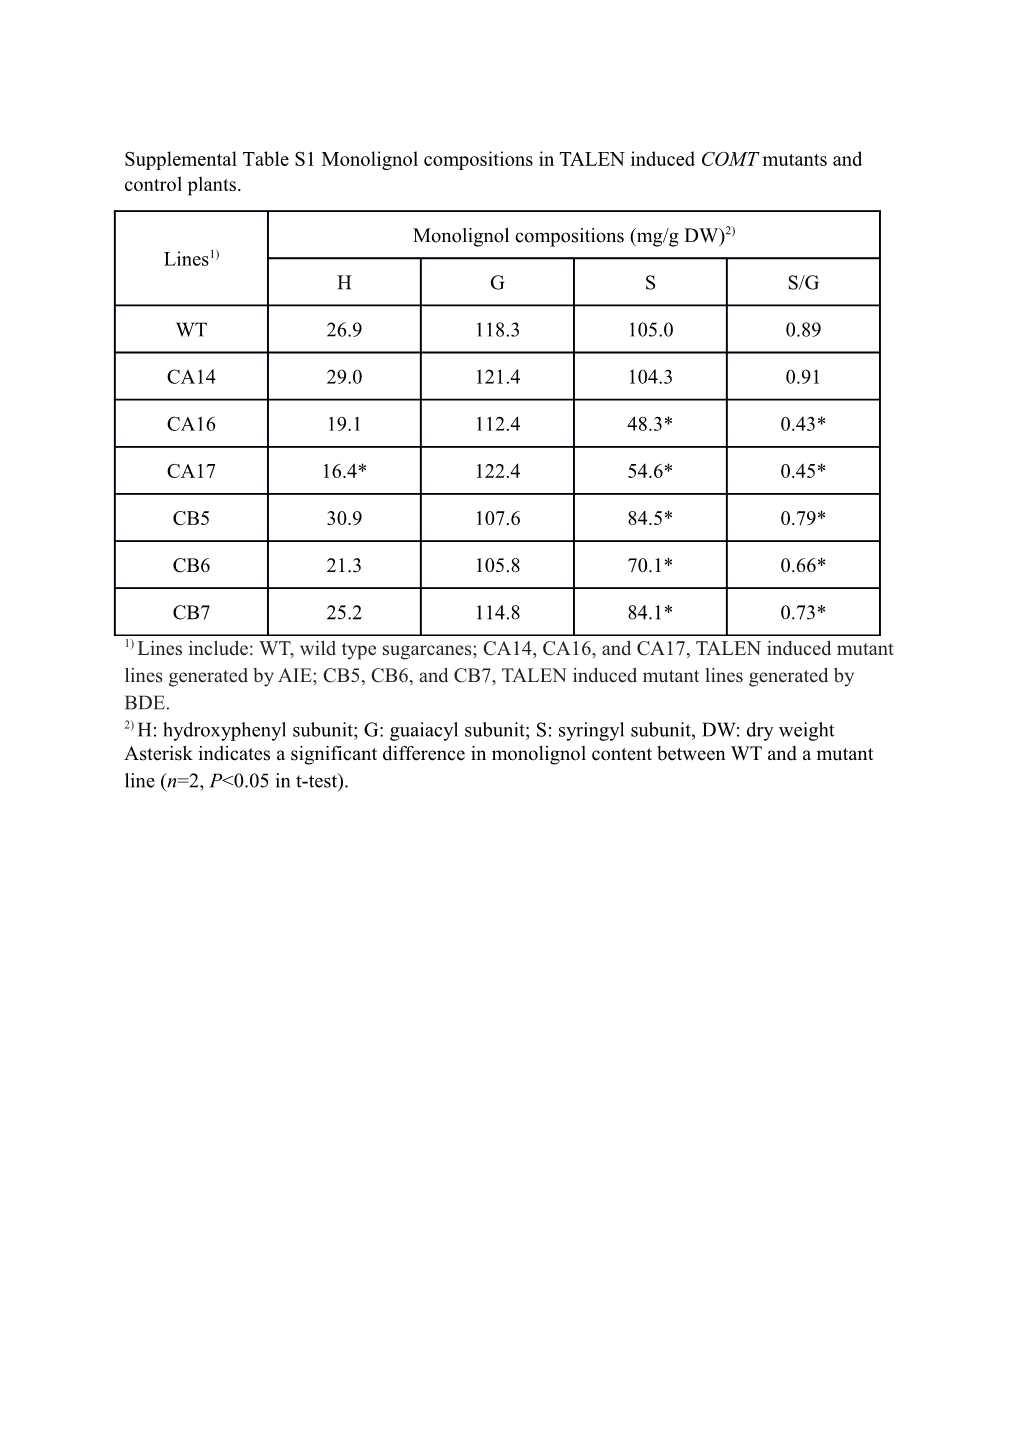 Supplemental Table S1 Monolignol Compositions in TALEN Inducedcomtmutants and Control Plants